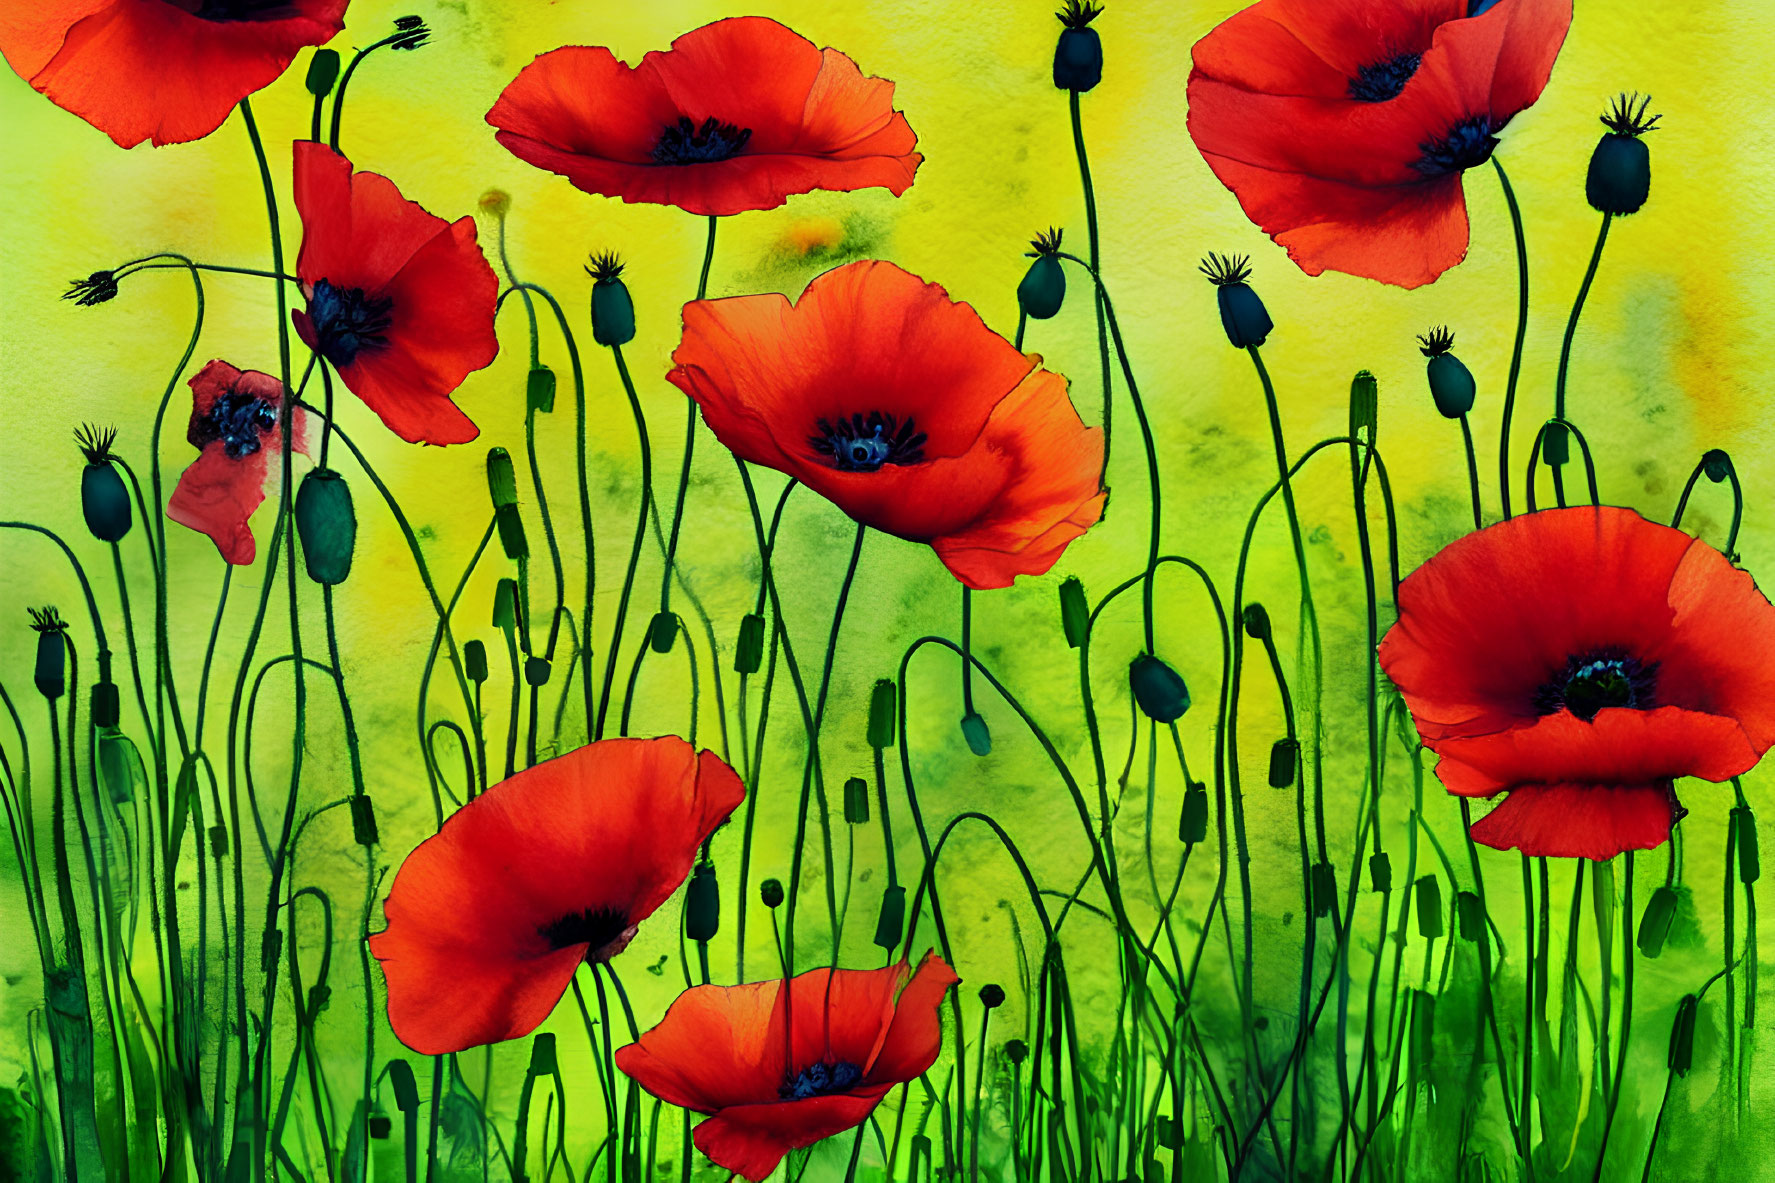 Colorful watercolor painting of red poppies on yellow and green background